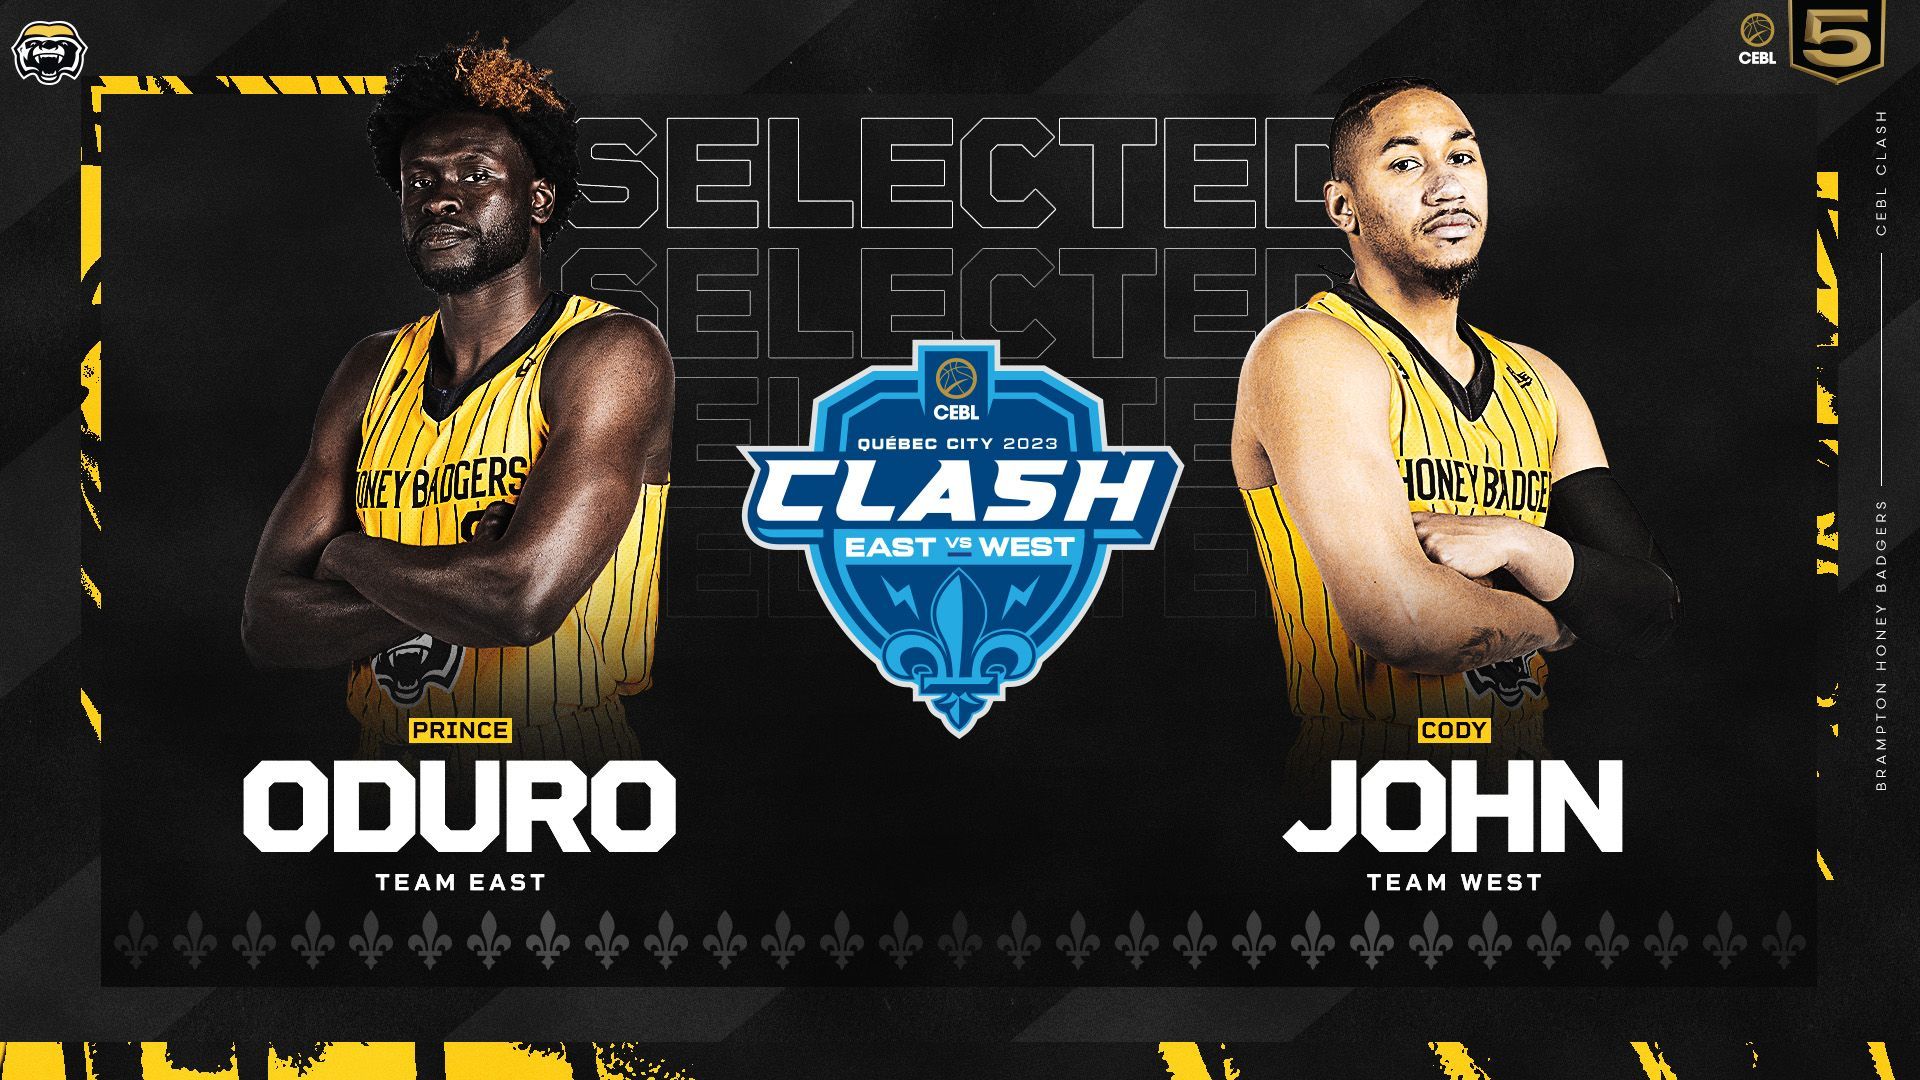 PRINCE ODURO AND CODY JOHN TO REPRESENT THE HONEY BADGERS AT CEBL CLASH